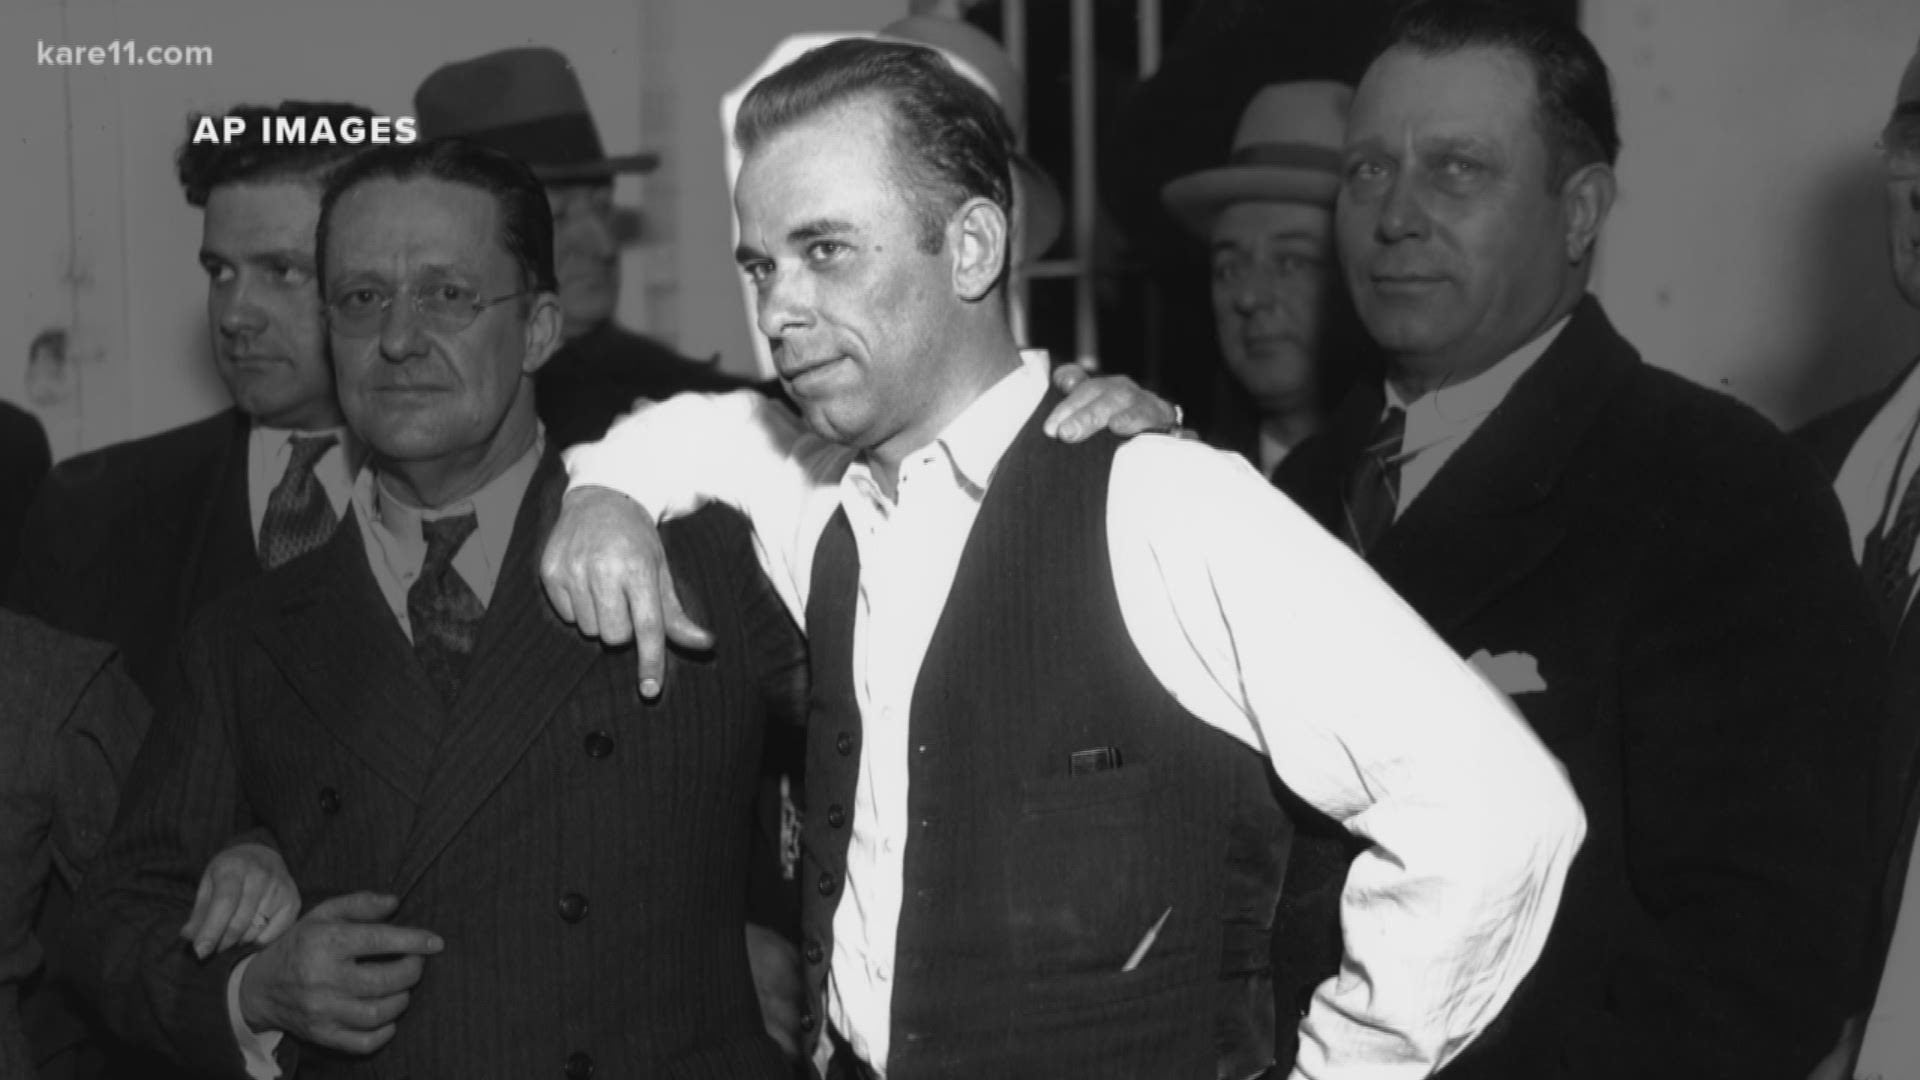 Come September skeptics will finally get some answers about IF John Dillinger's body is REALLY in John Dillinger's grave.